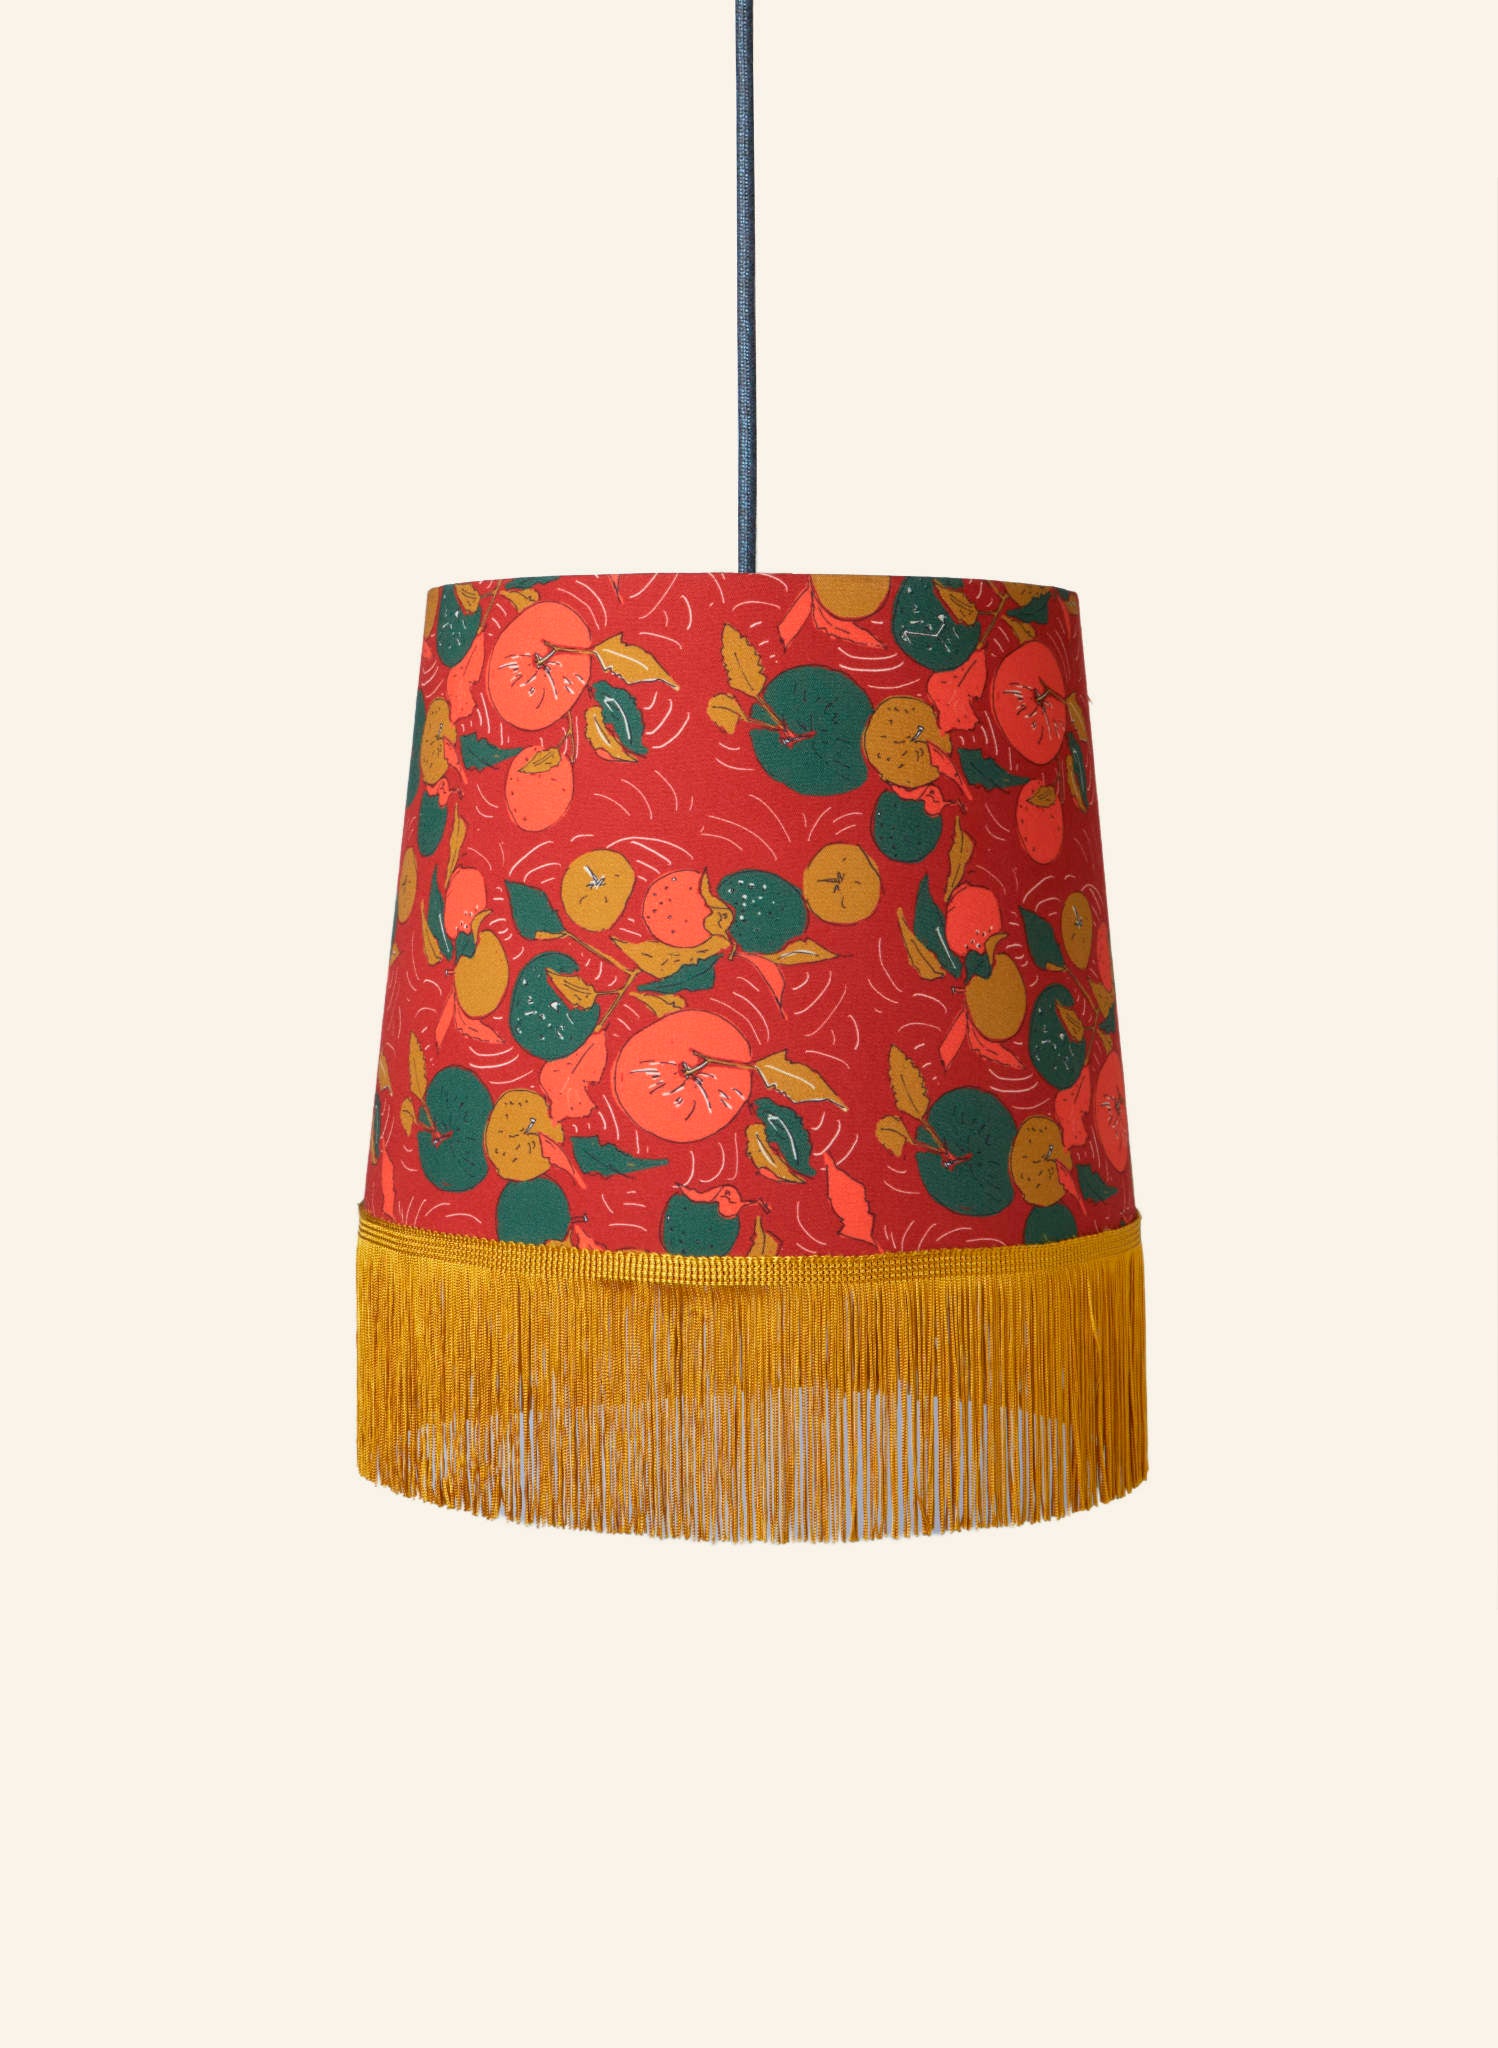 Empire Fringe Lampshade - Red Apple Orchard